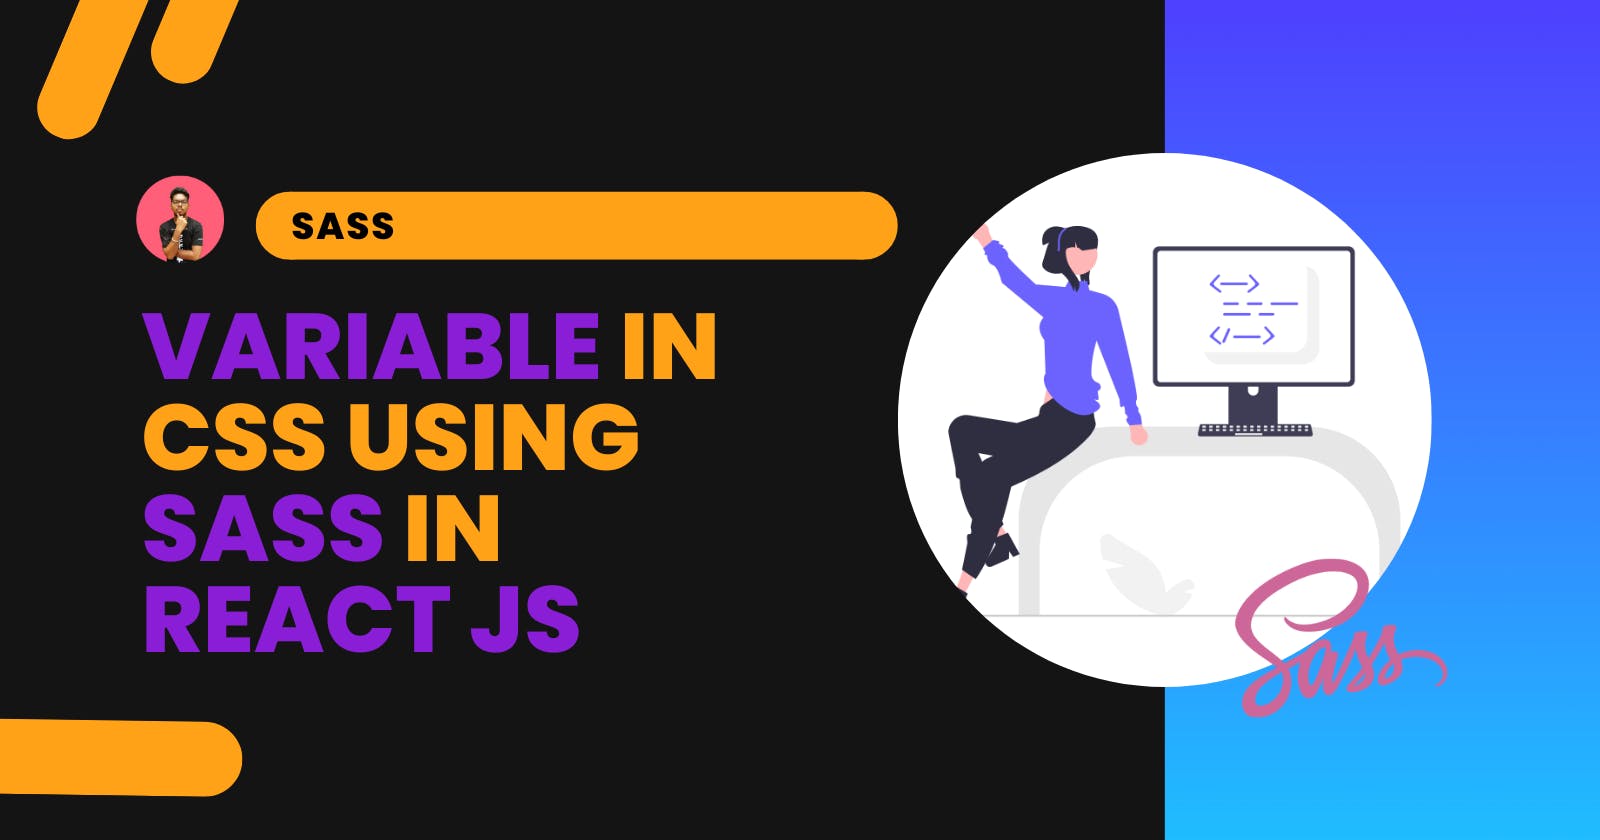 Implementing Variable in CSS using Sass in React JS